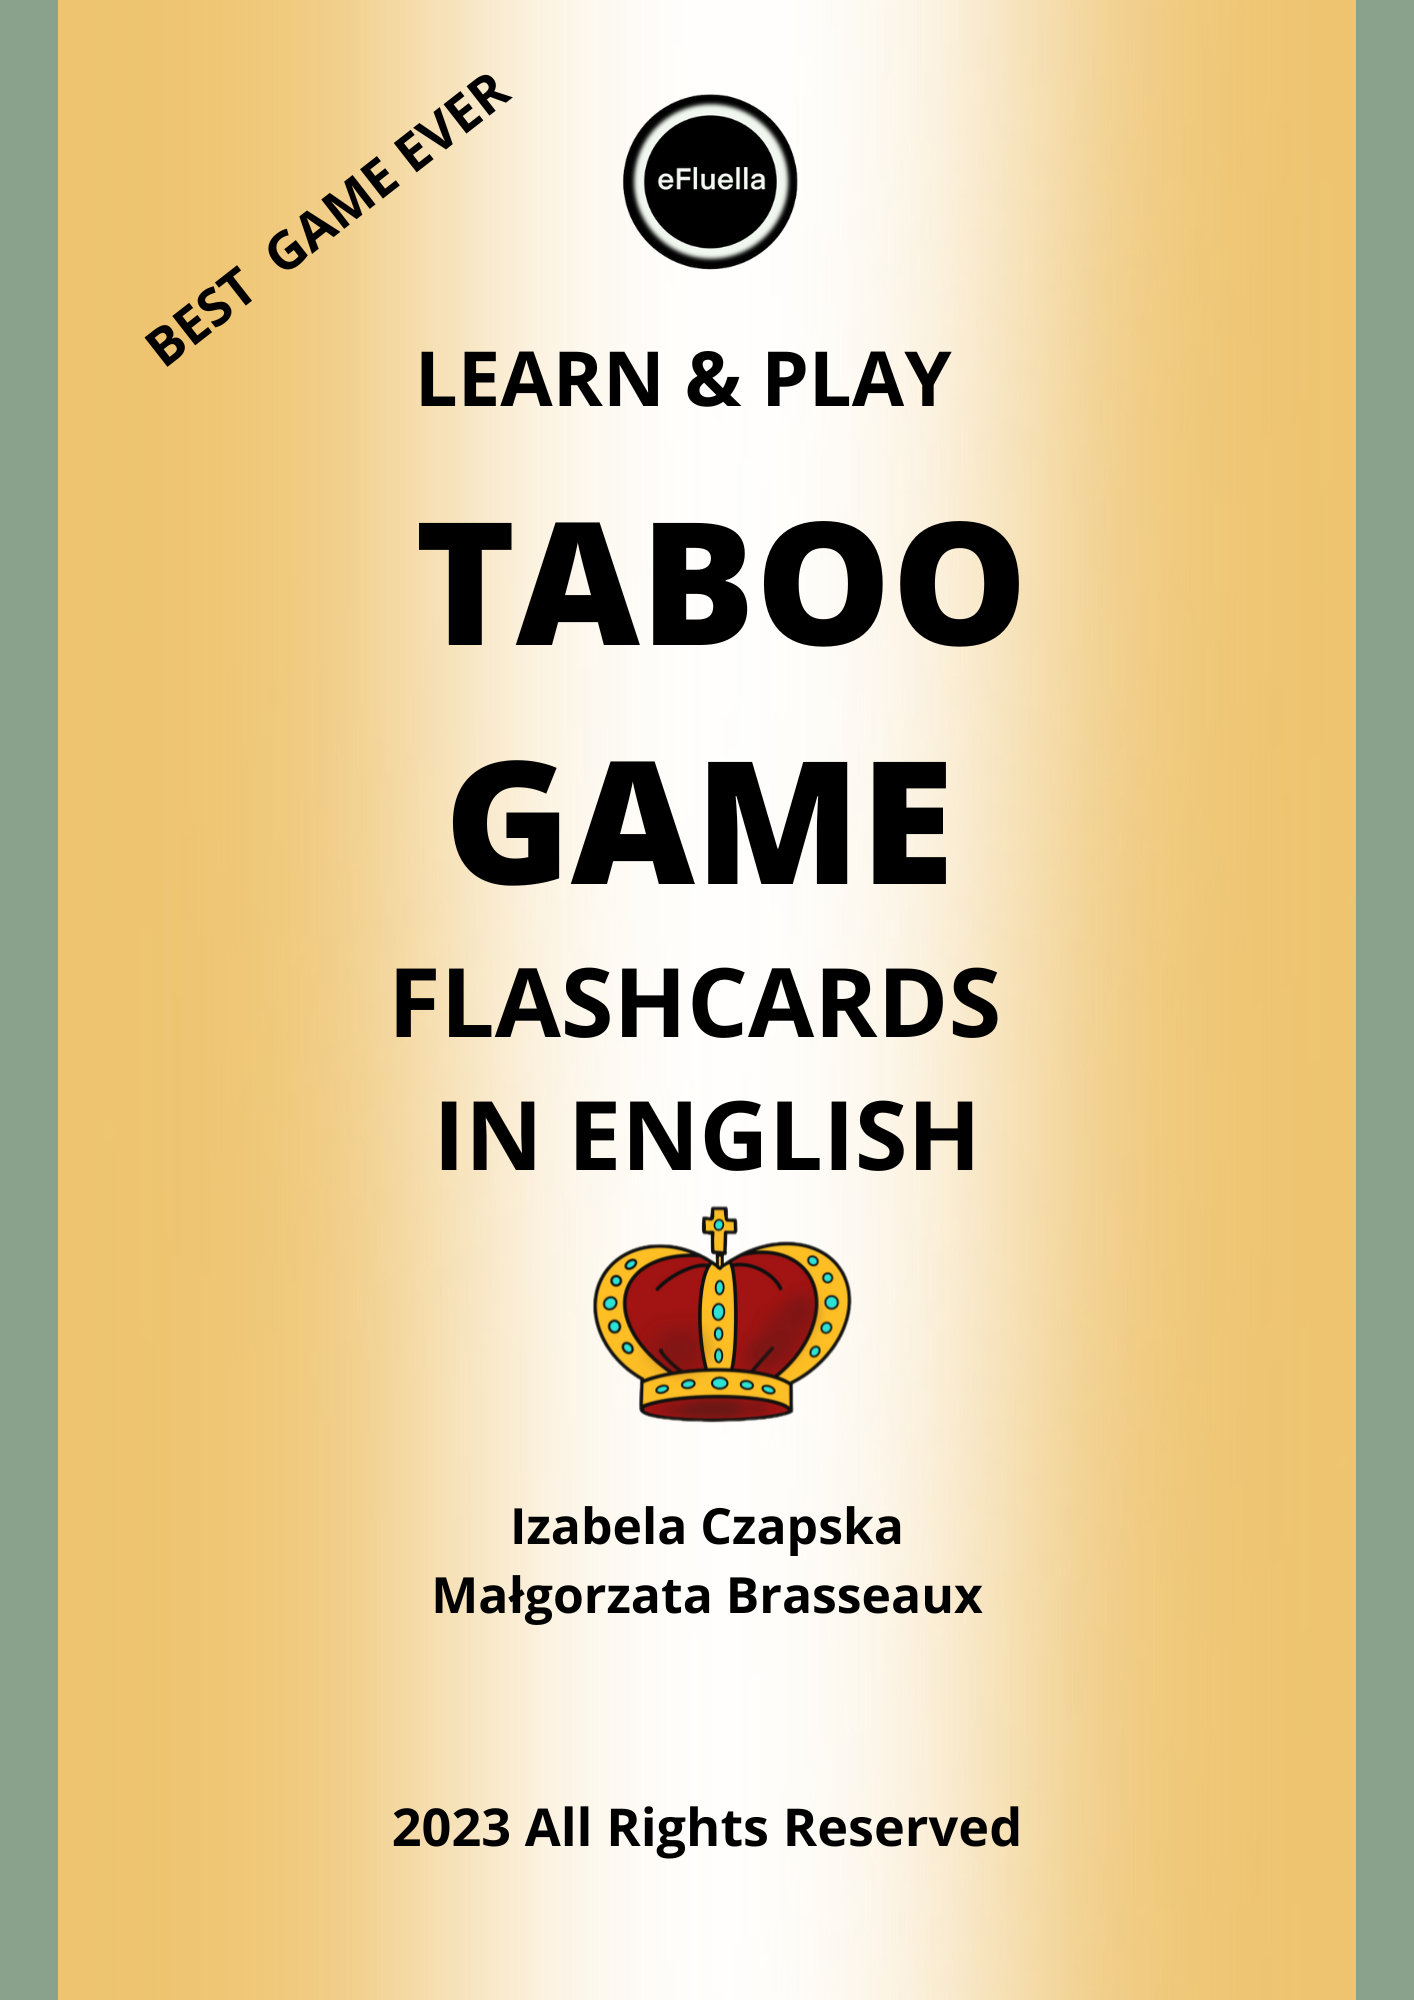 TABOO FLASHCARDS GAME